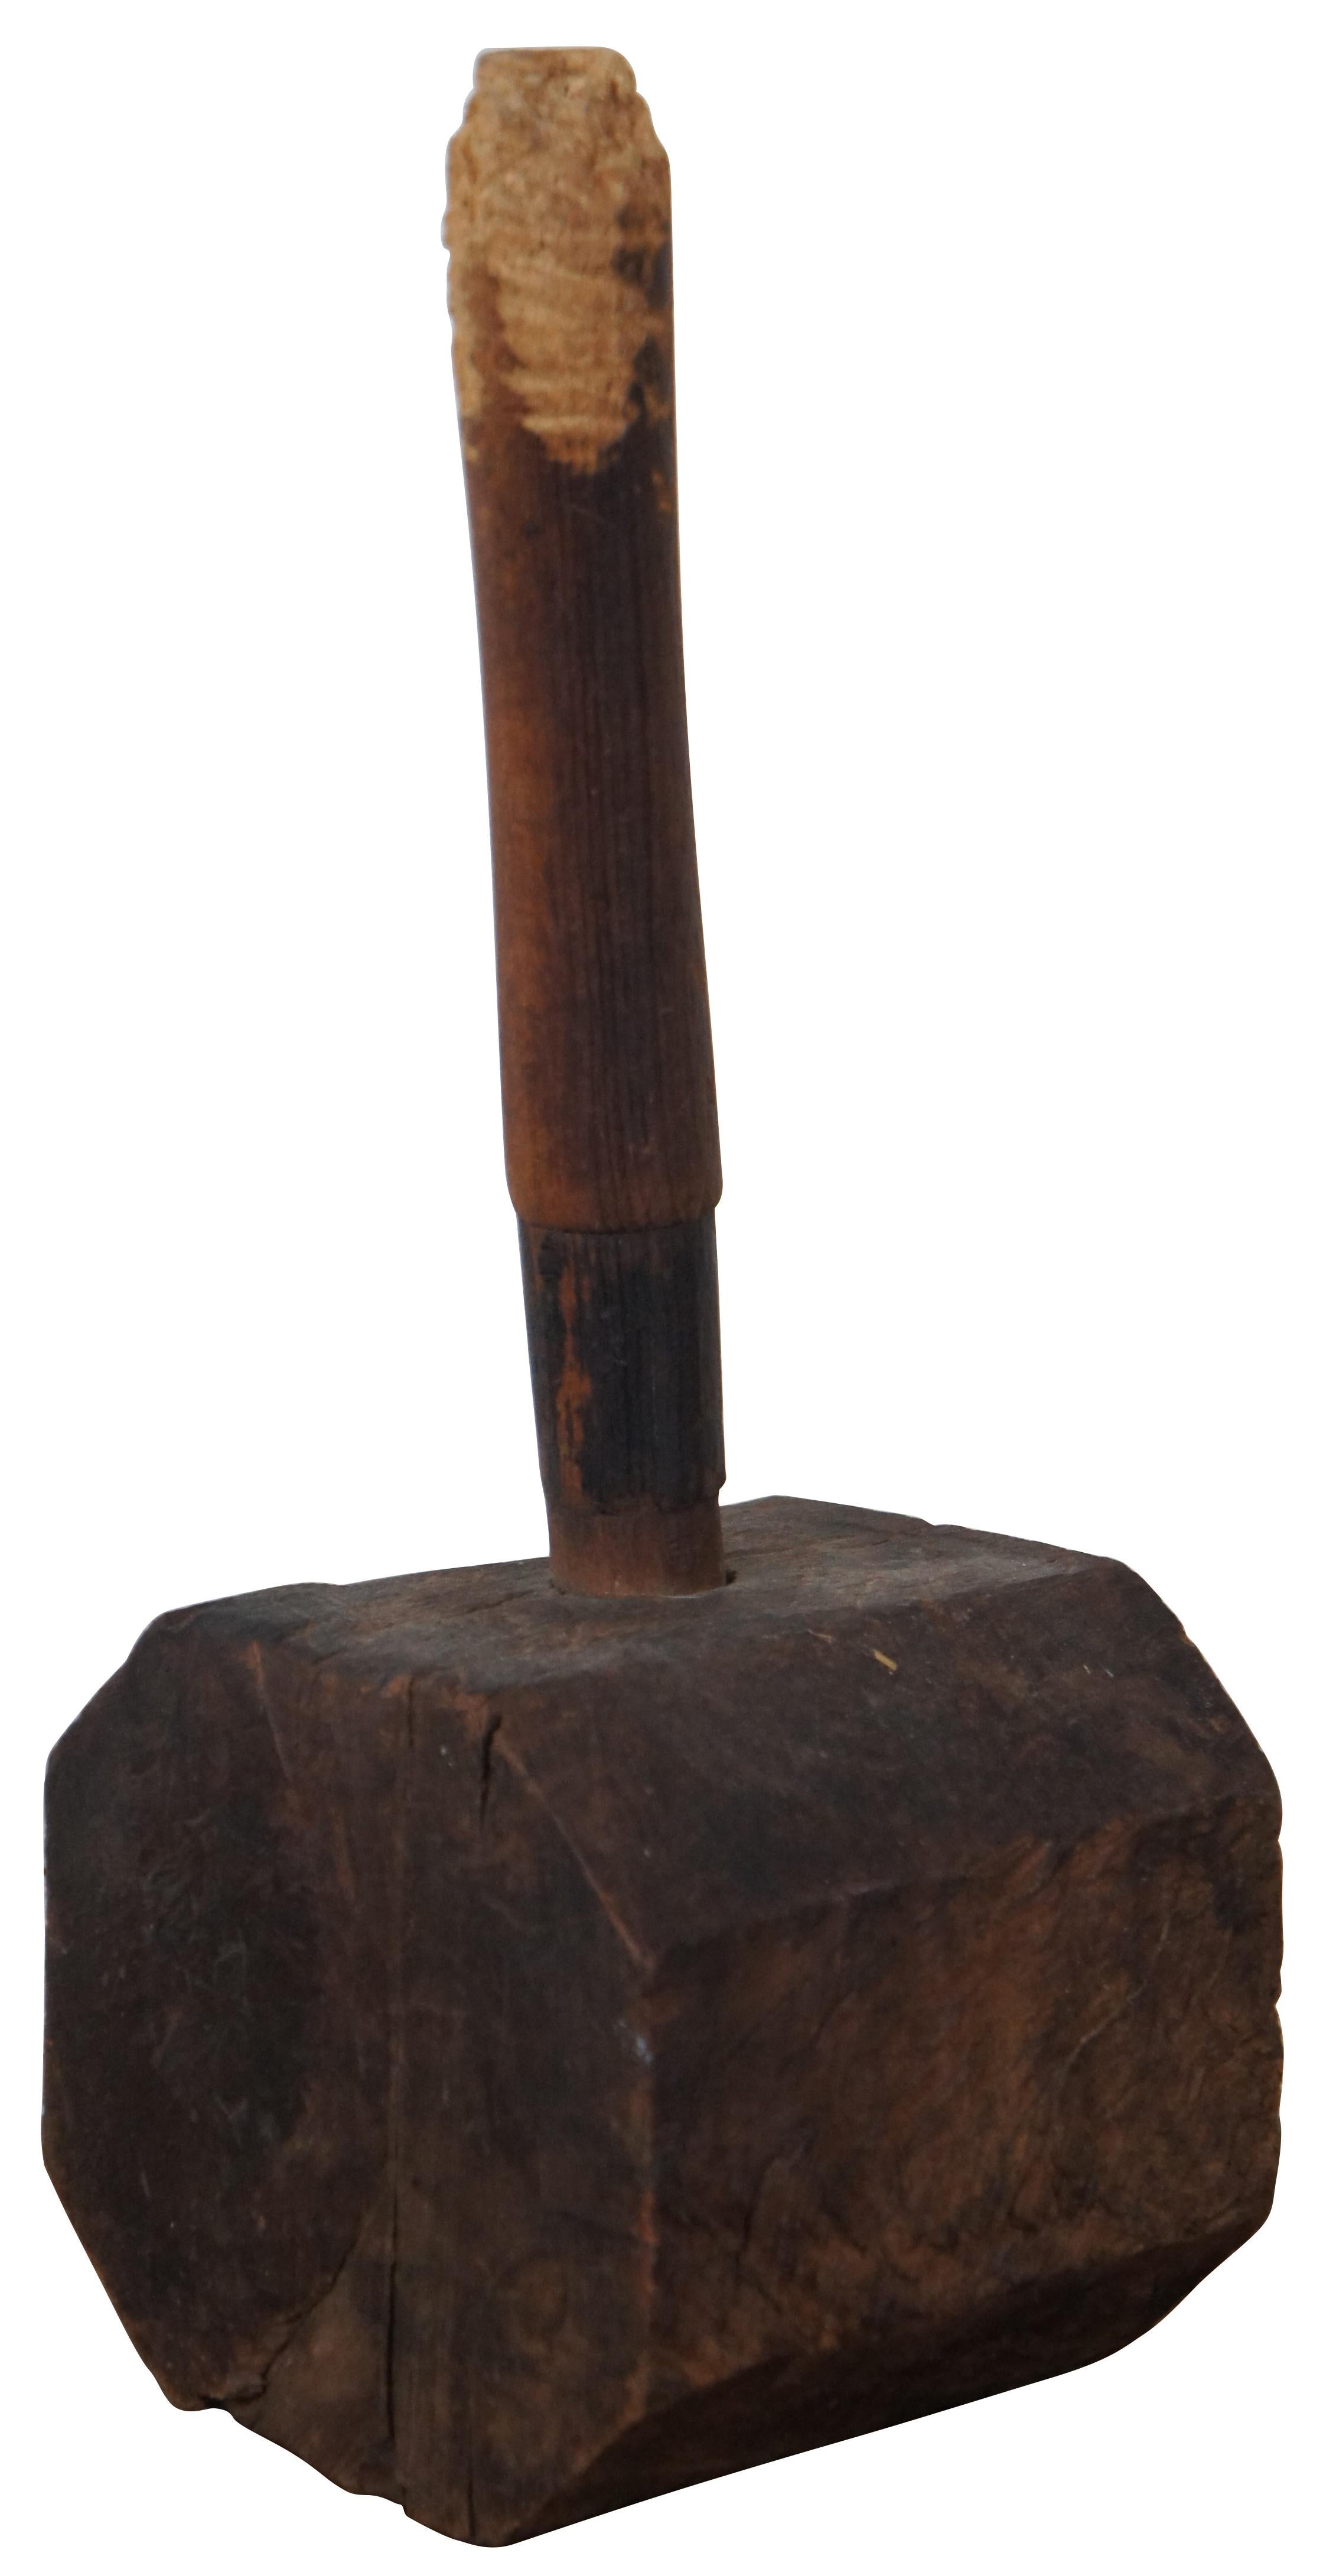 Antique primitive / rustic hand crafted heavy wooden mallet with octagonal shaped head and rounded handle. Measures: 14